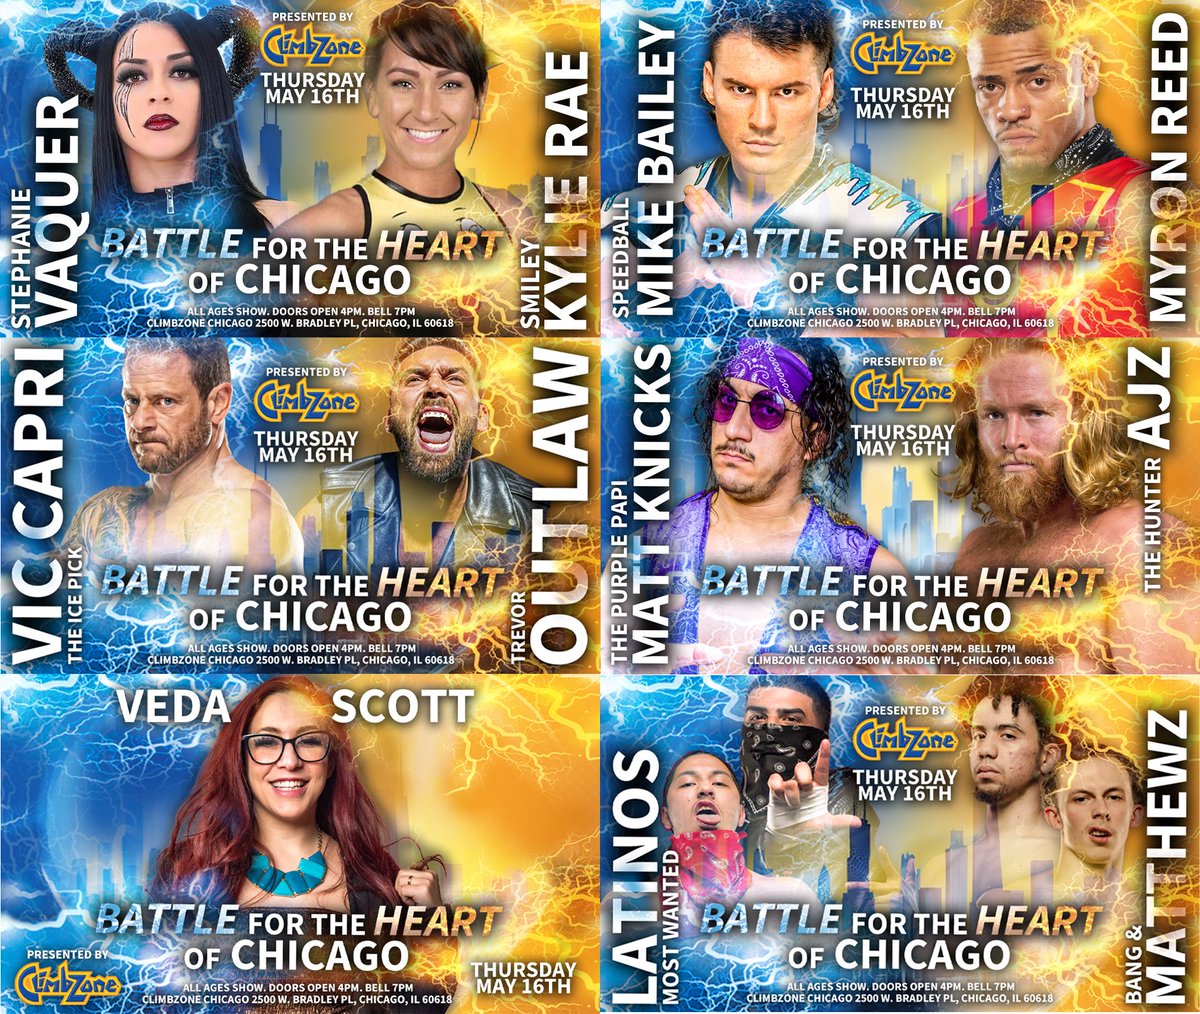 This card for Thursday, May 16 in Chicago absolutely SLAPS! First-ever, all-timer women's match between the most beloved Chicago wrestler and the most impressive and fastest rising women's wrestler across multiple companies? ✔️ Super banger among two of the most talented in